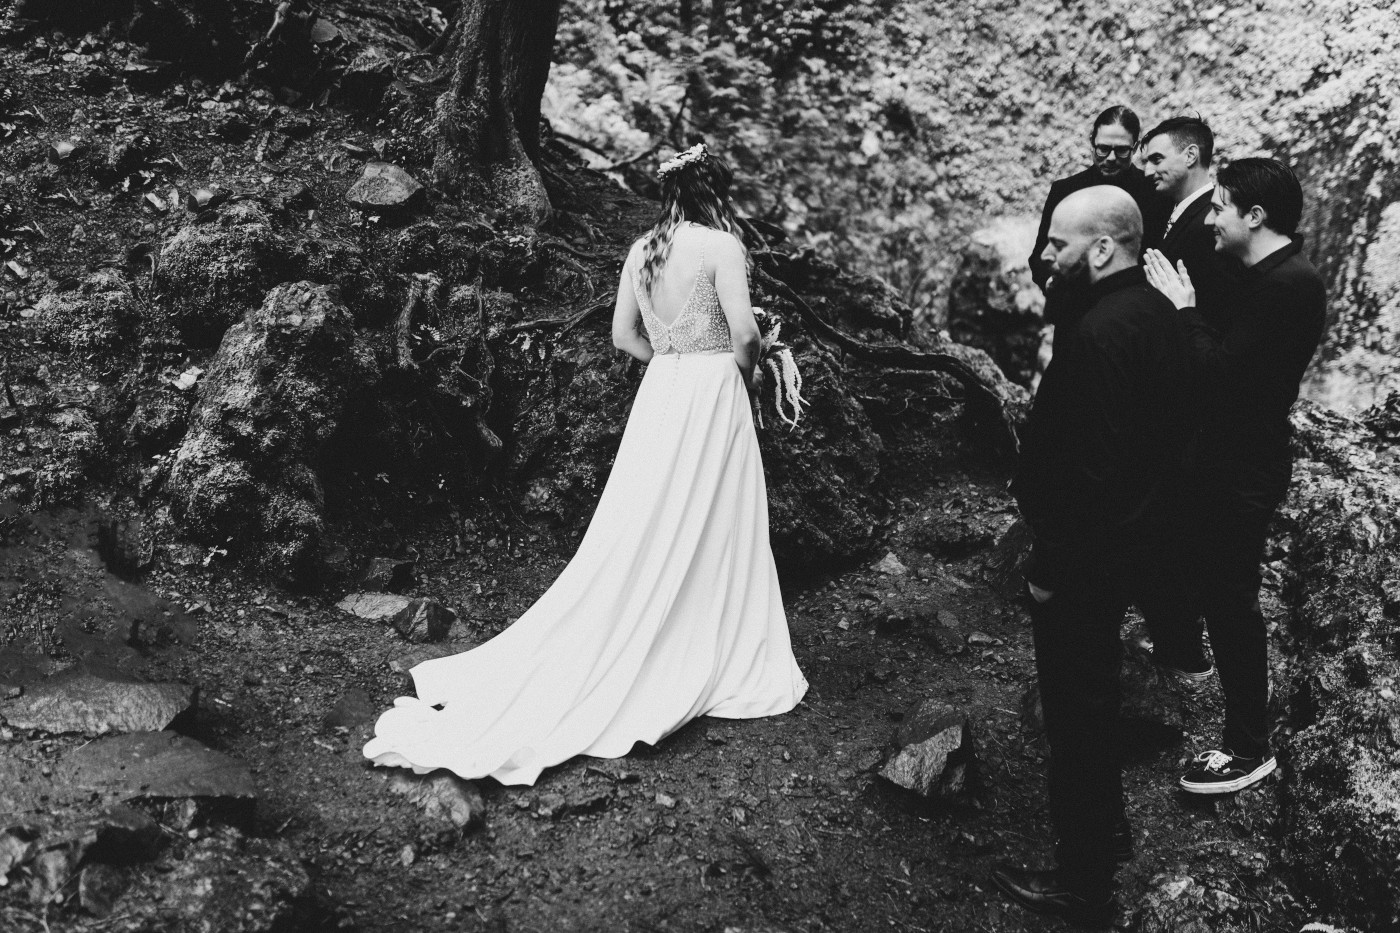 Jordan makes her way down to Andrew at Wahclella Falls to being their elopement ceremony.